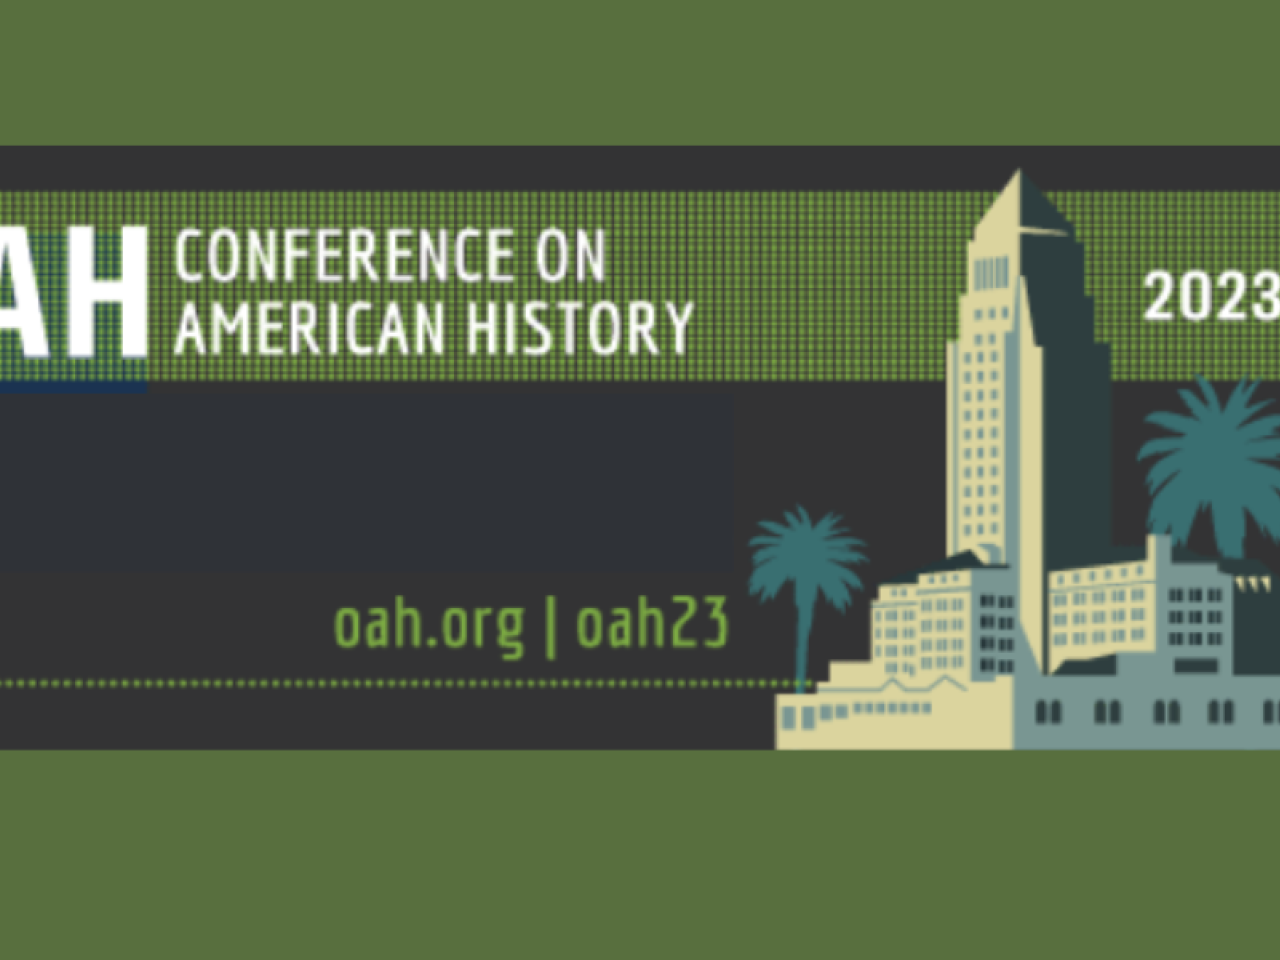 OAH CONFERENCE on american history 2023 los angeles header